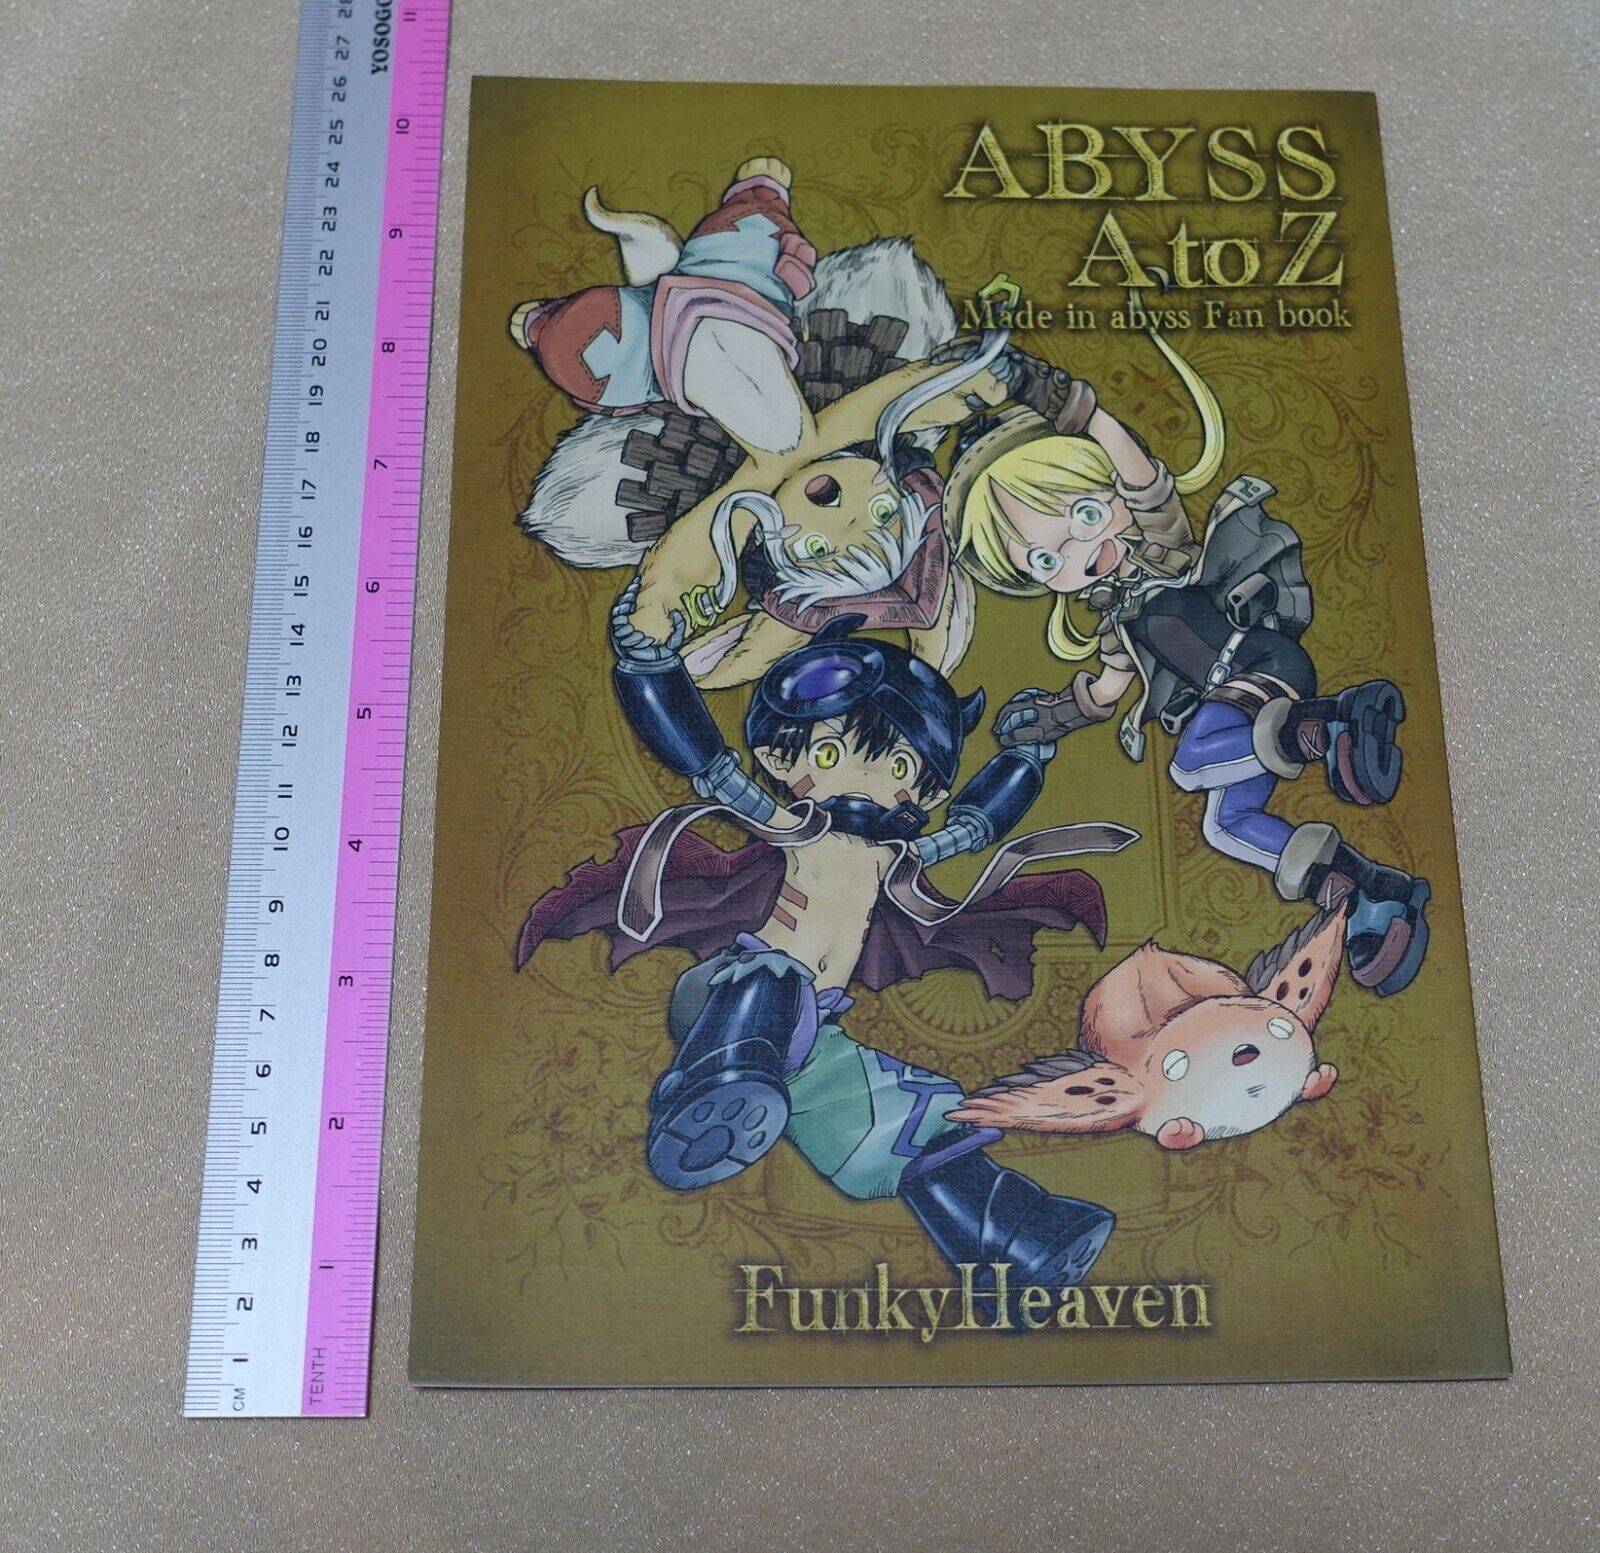 Made in Abyss Vol. 4 (Paperback)